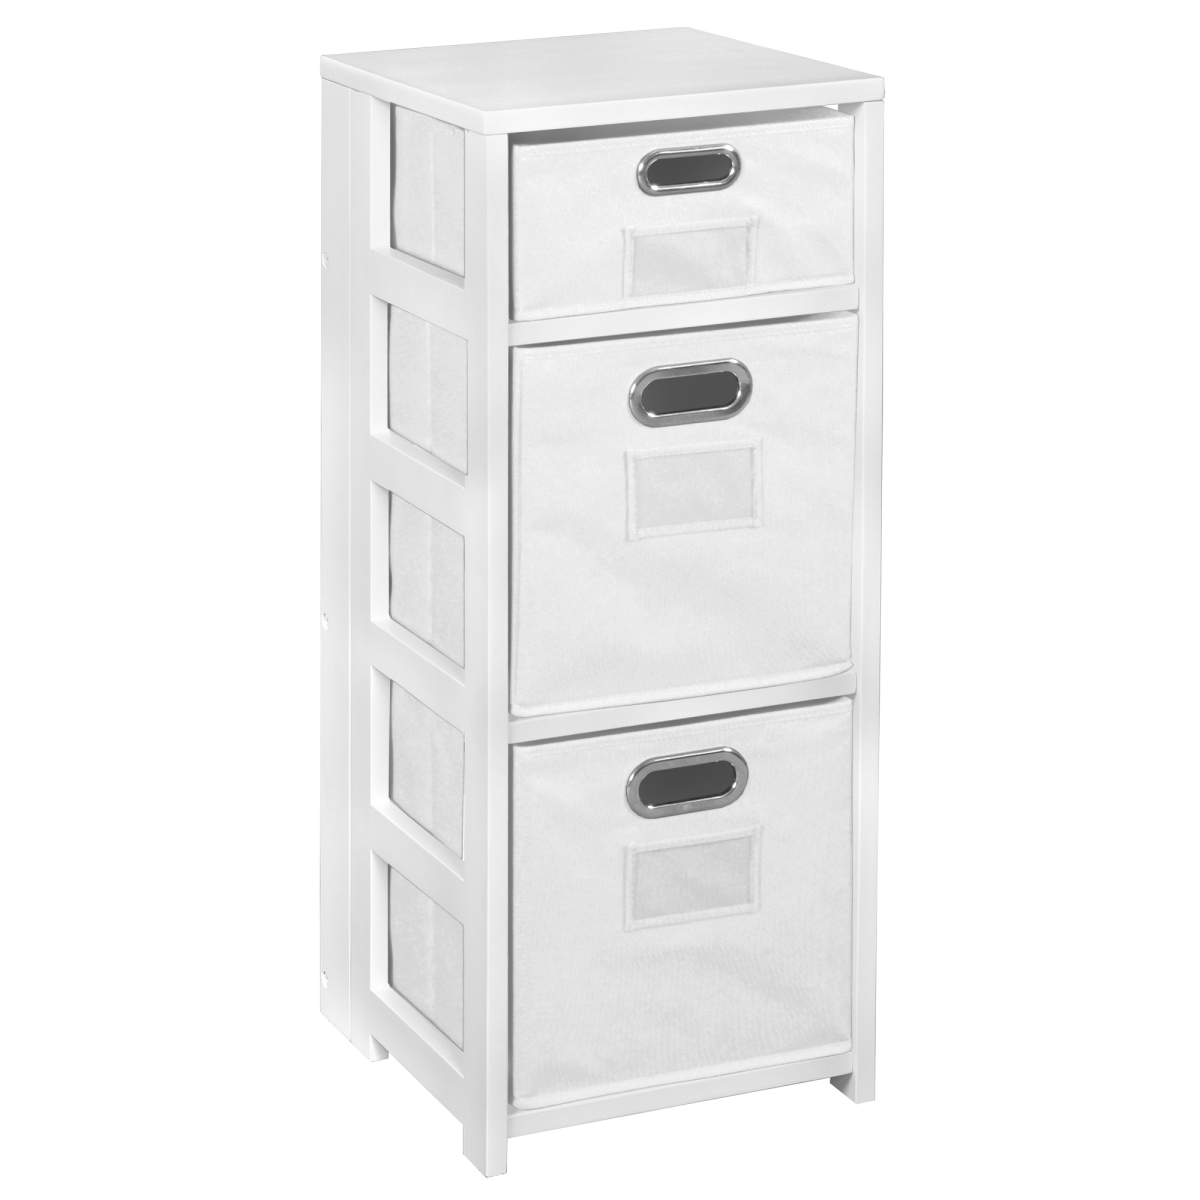 Ffsq3412whwh Flip Flop 34 In. Square Folding Bookcase With Folding Fabric Bins, White & White